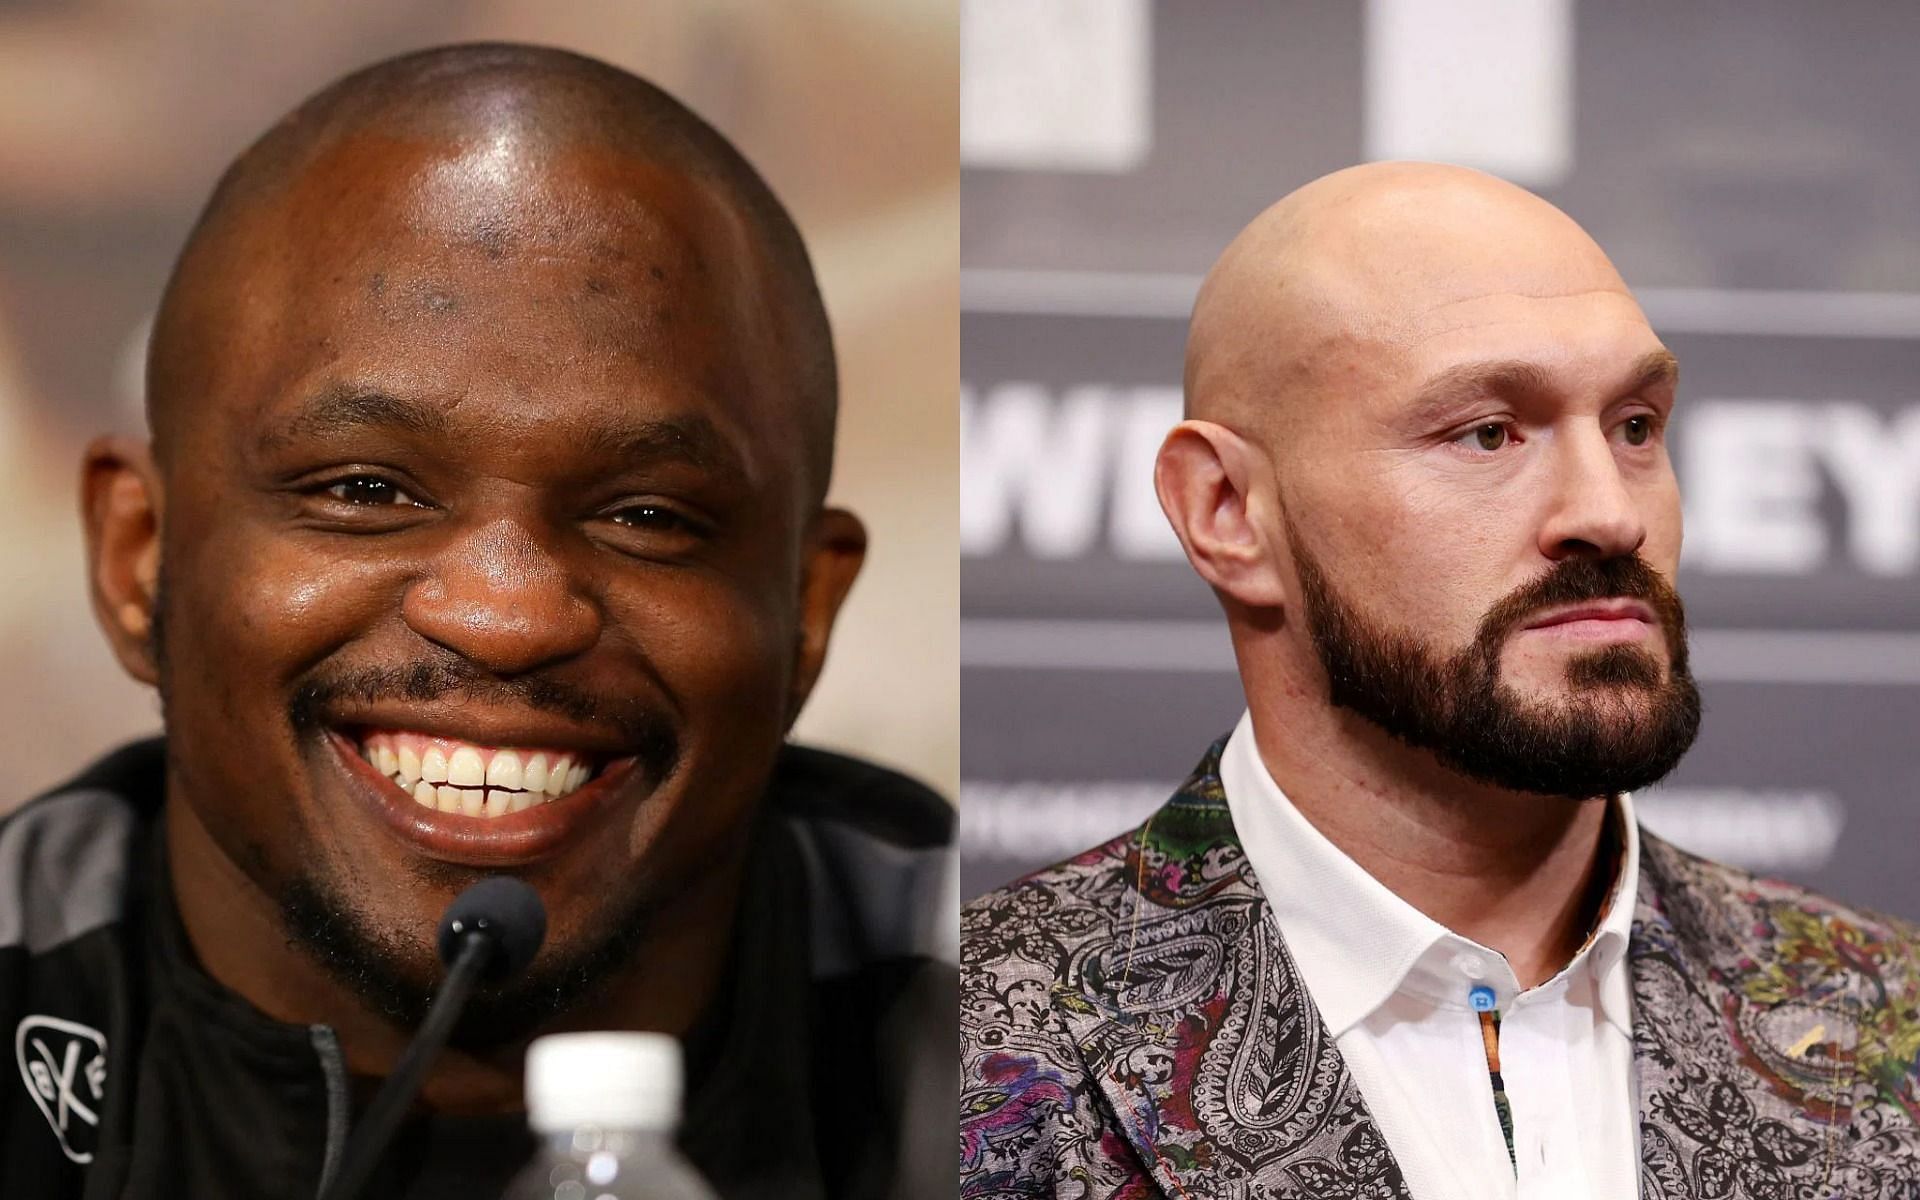 Dillian Whyte (L) has gotten candid about his sparring sessions with Tyson Fury (R)